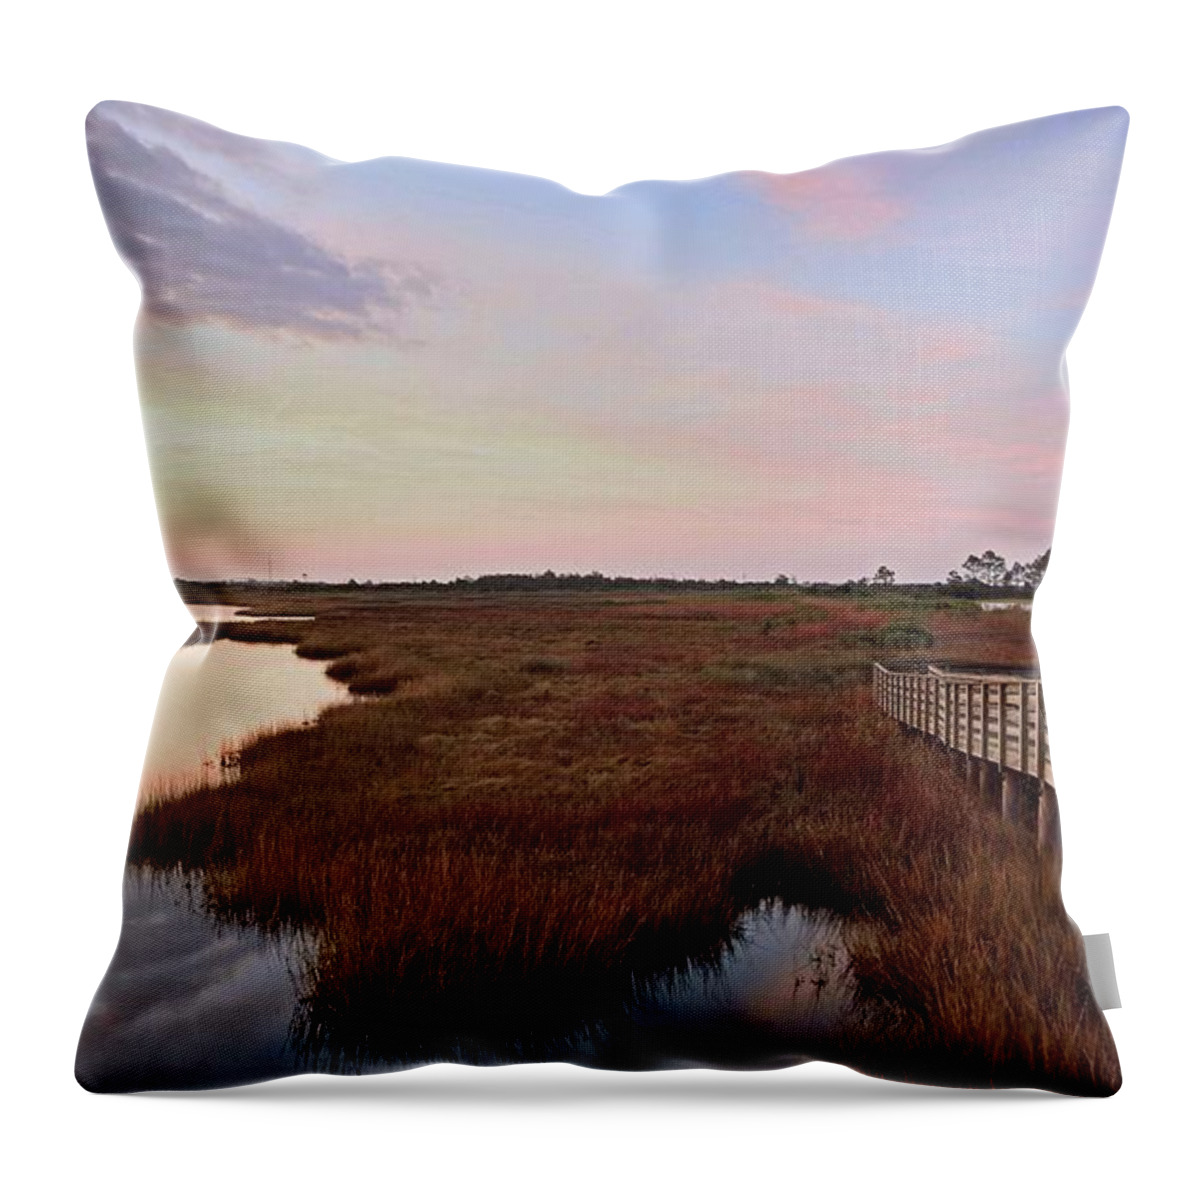 Bodie Island Lighthouse Throw Pillow featuring the photograph Bodie Island Light by Jamie Pattison